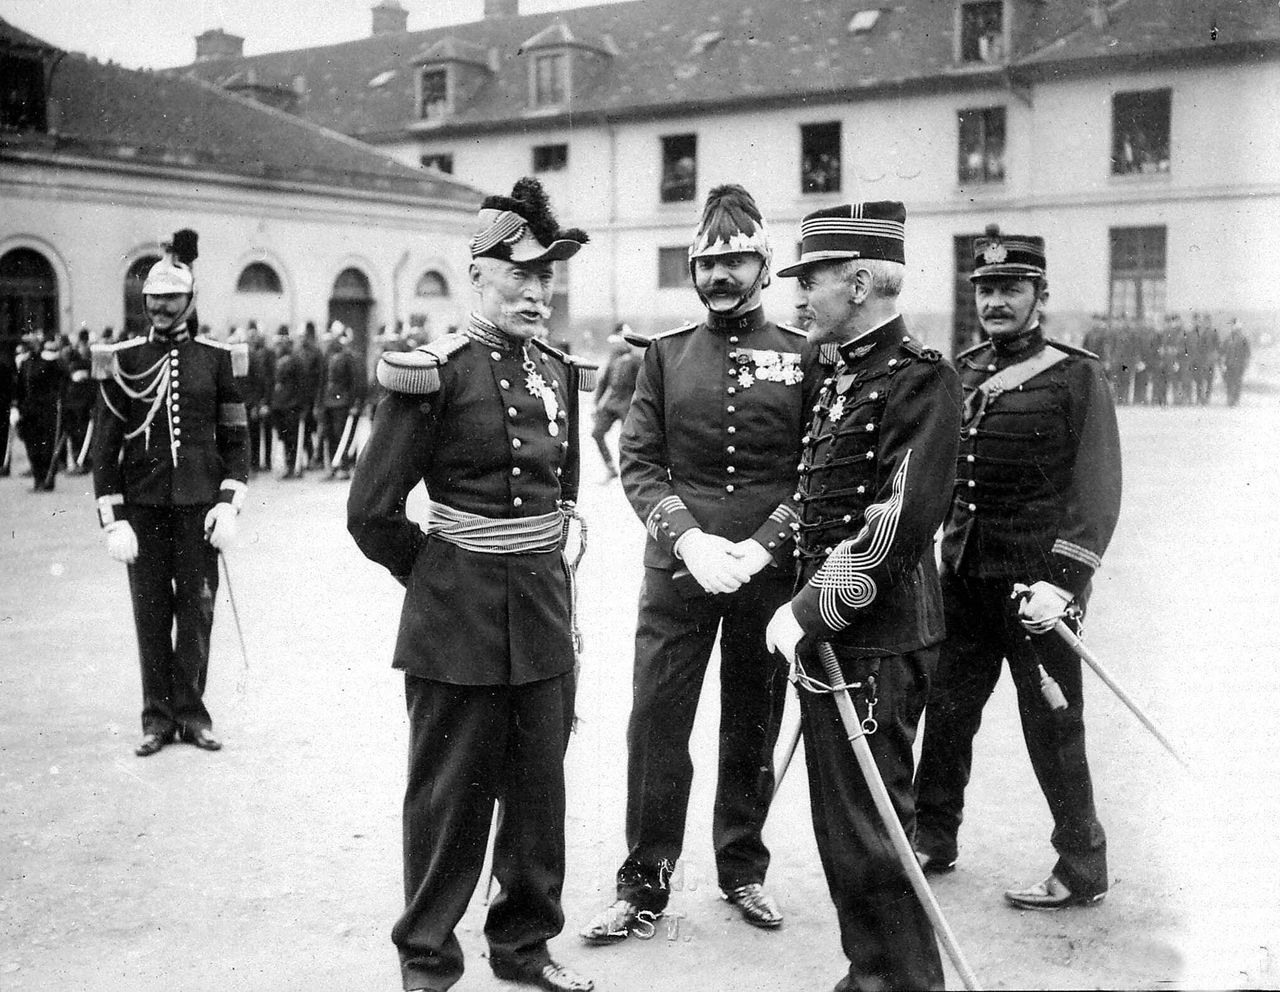 FRANCE - 1916: Dreyfus's rehabilitation after the discount of decorations. The commander Dreyfus speaks to general Gillain and the commander Targe. 1906. RV-324549A. (Photo by Roger Viollet via Getty Images)